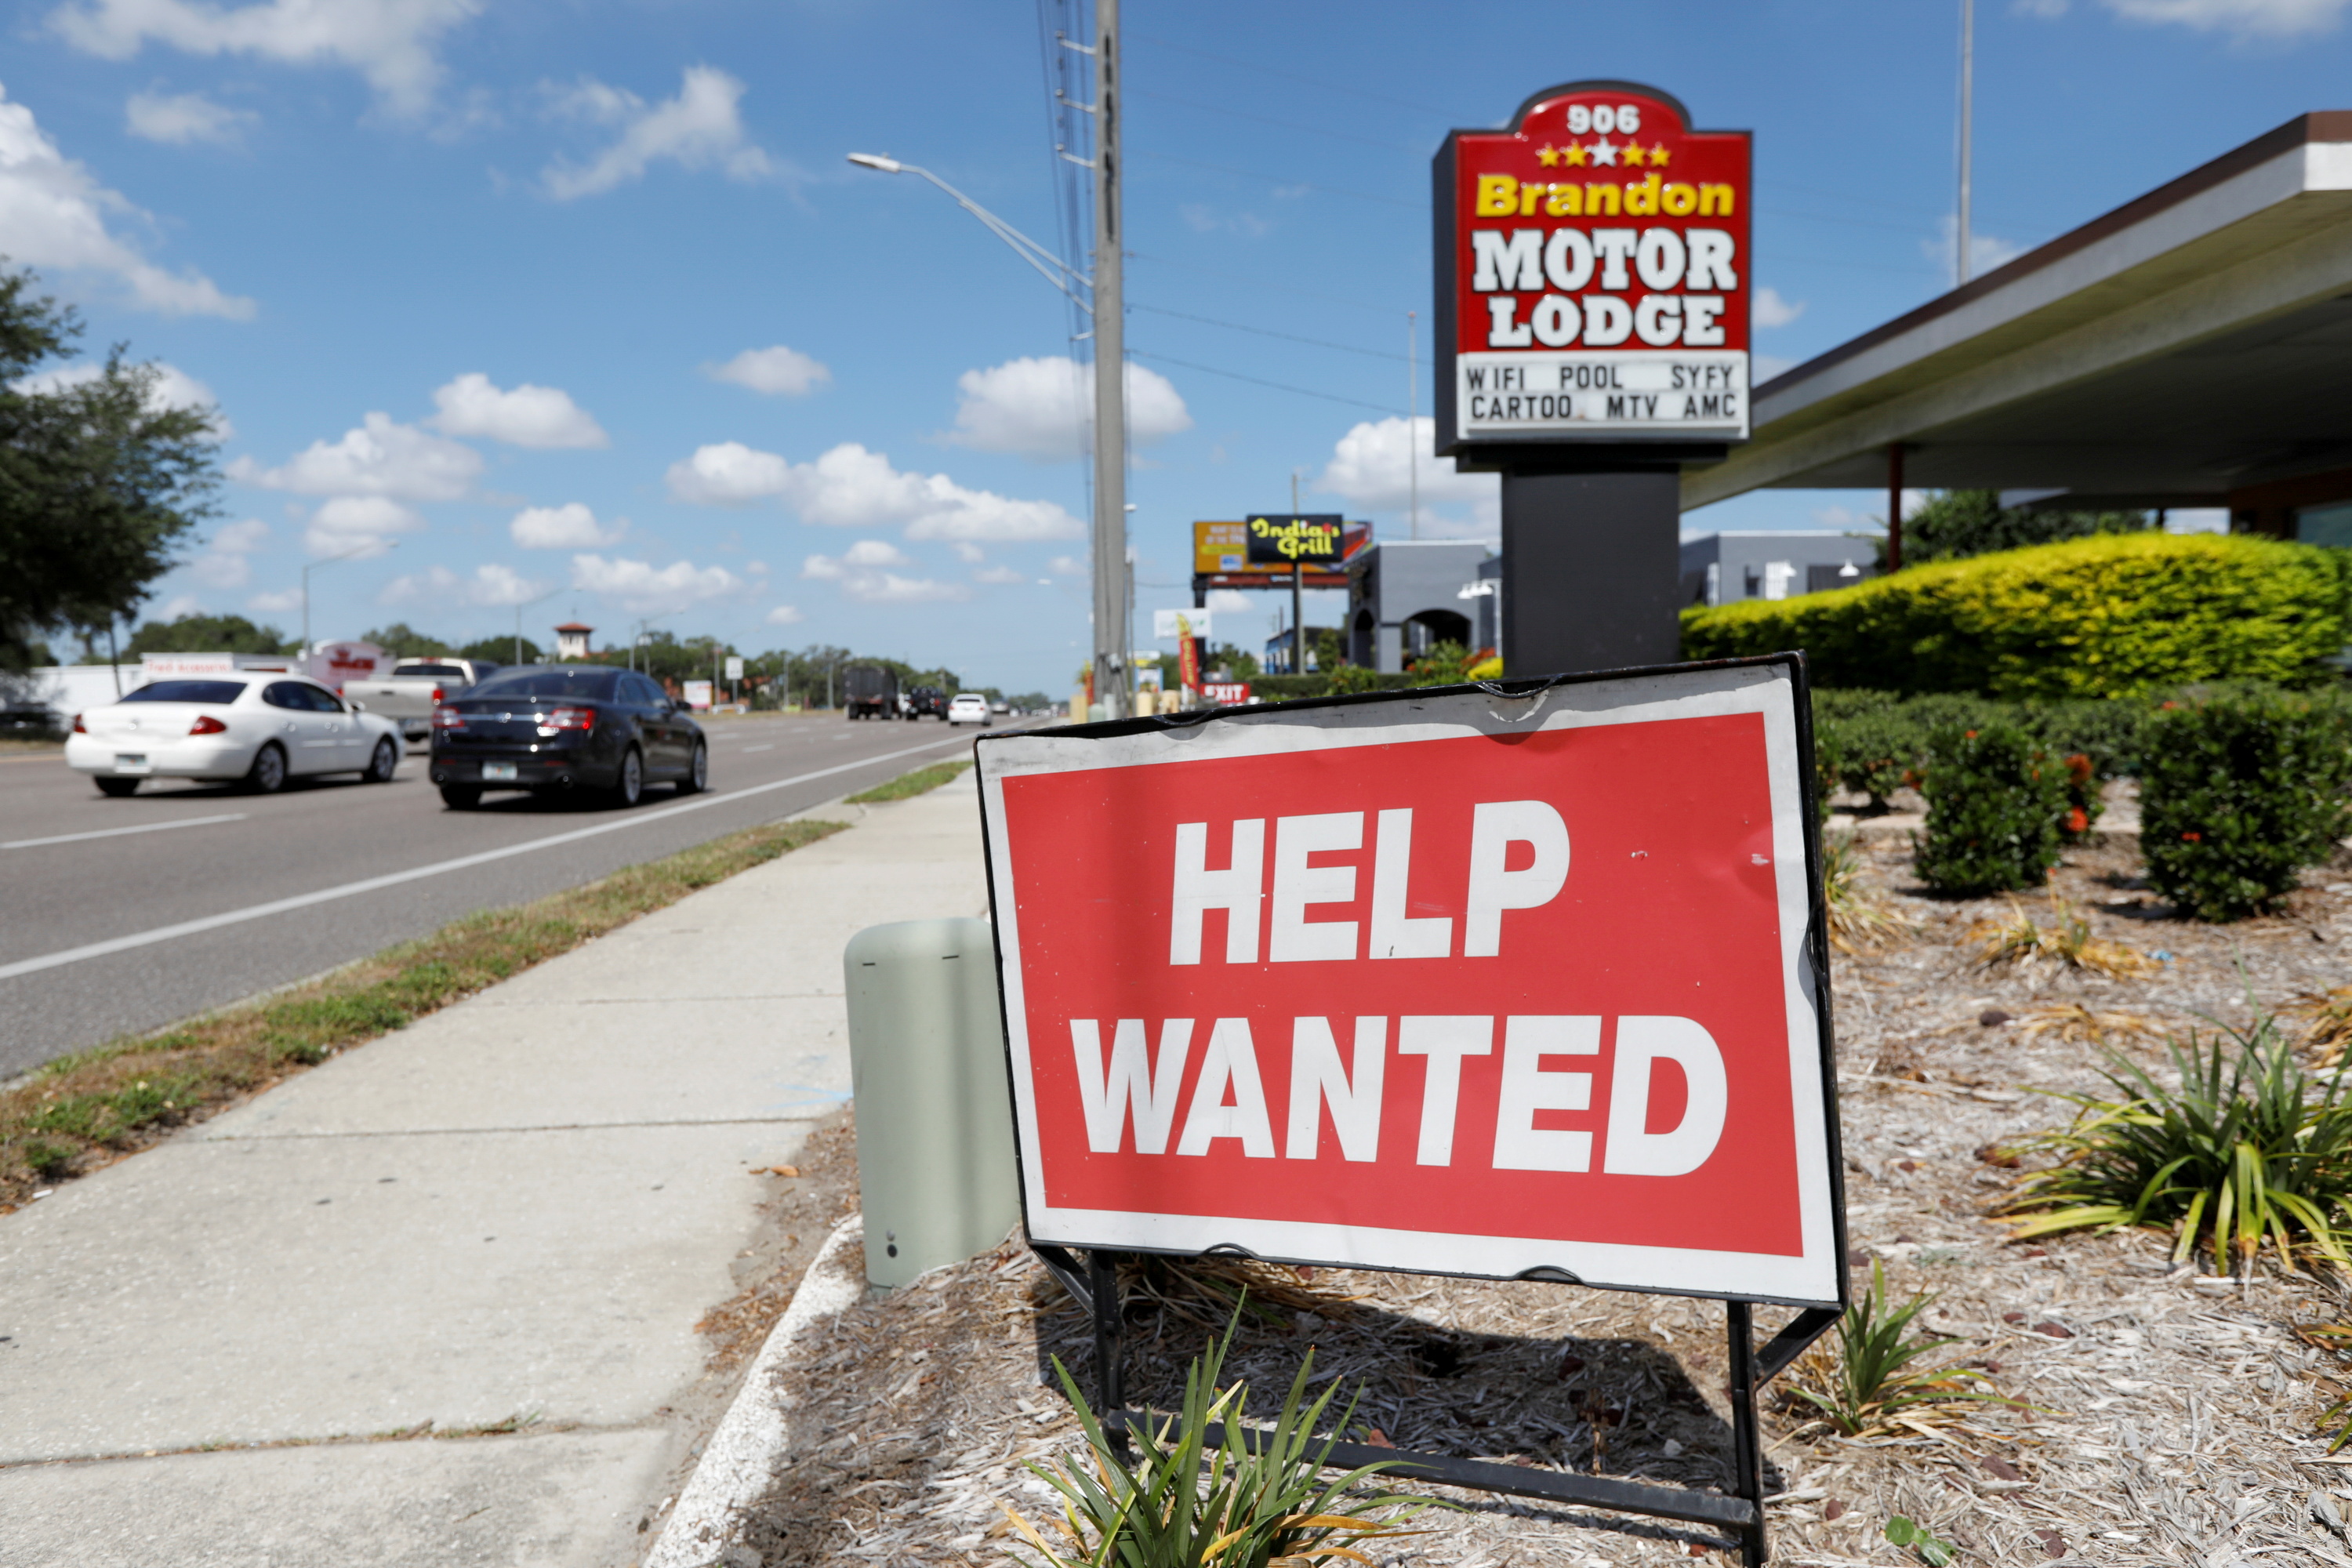 Help wanted signs appear across Brandon